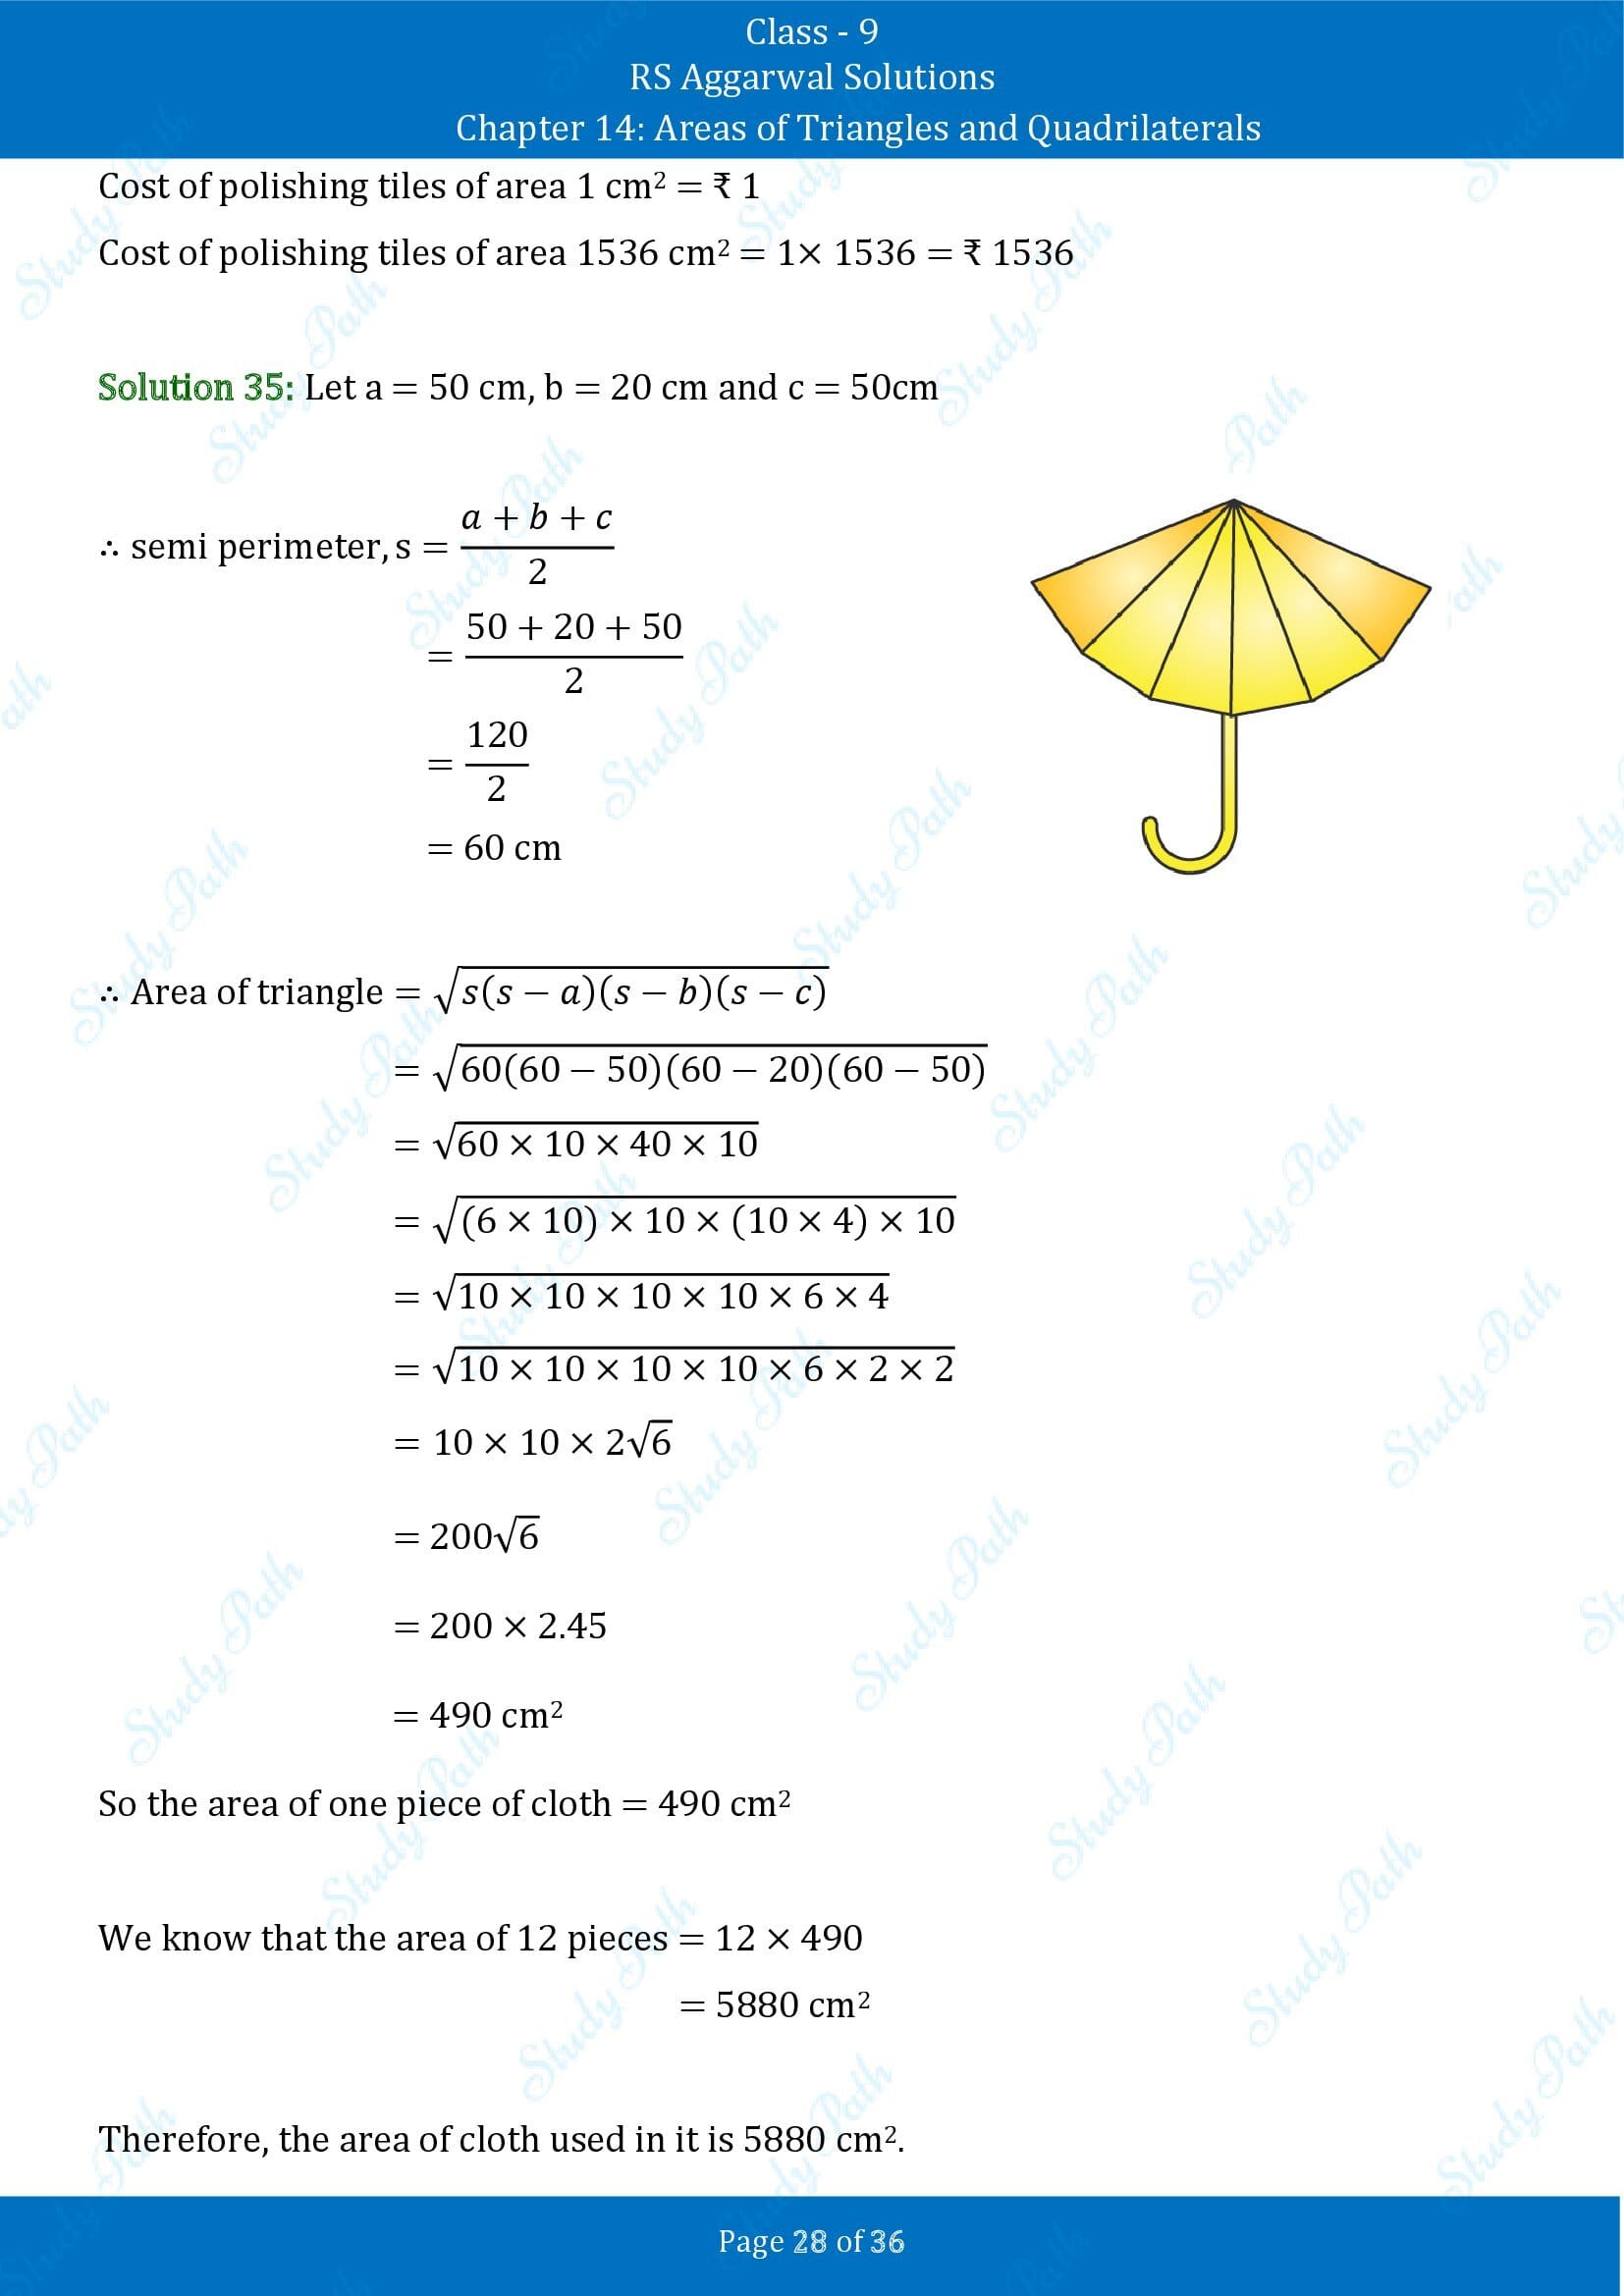 RS Aggarwal Solutions Class 9 Chapter 14 Areas of Triangles and Quadrilaterals Exercise 14 00028